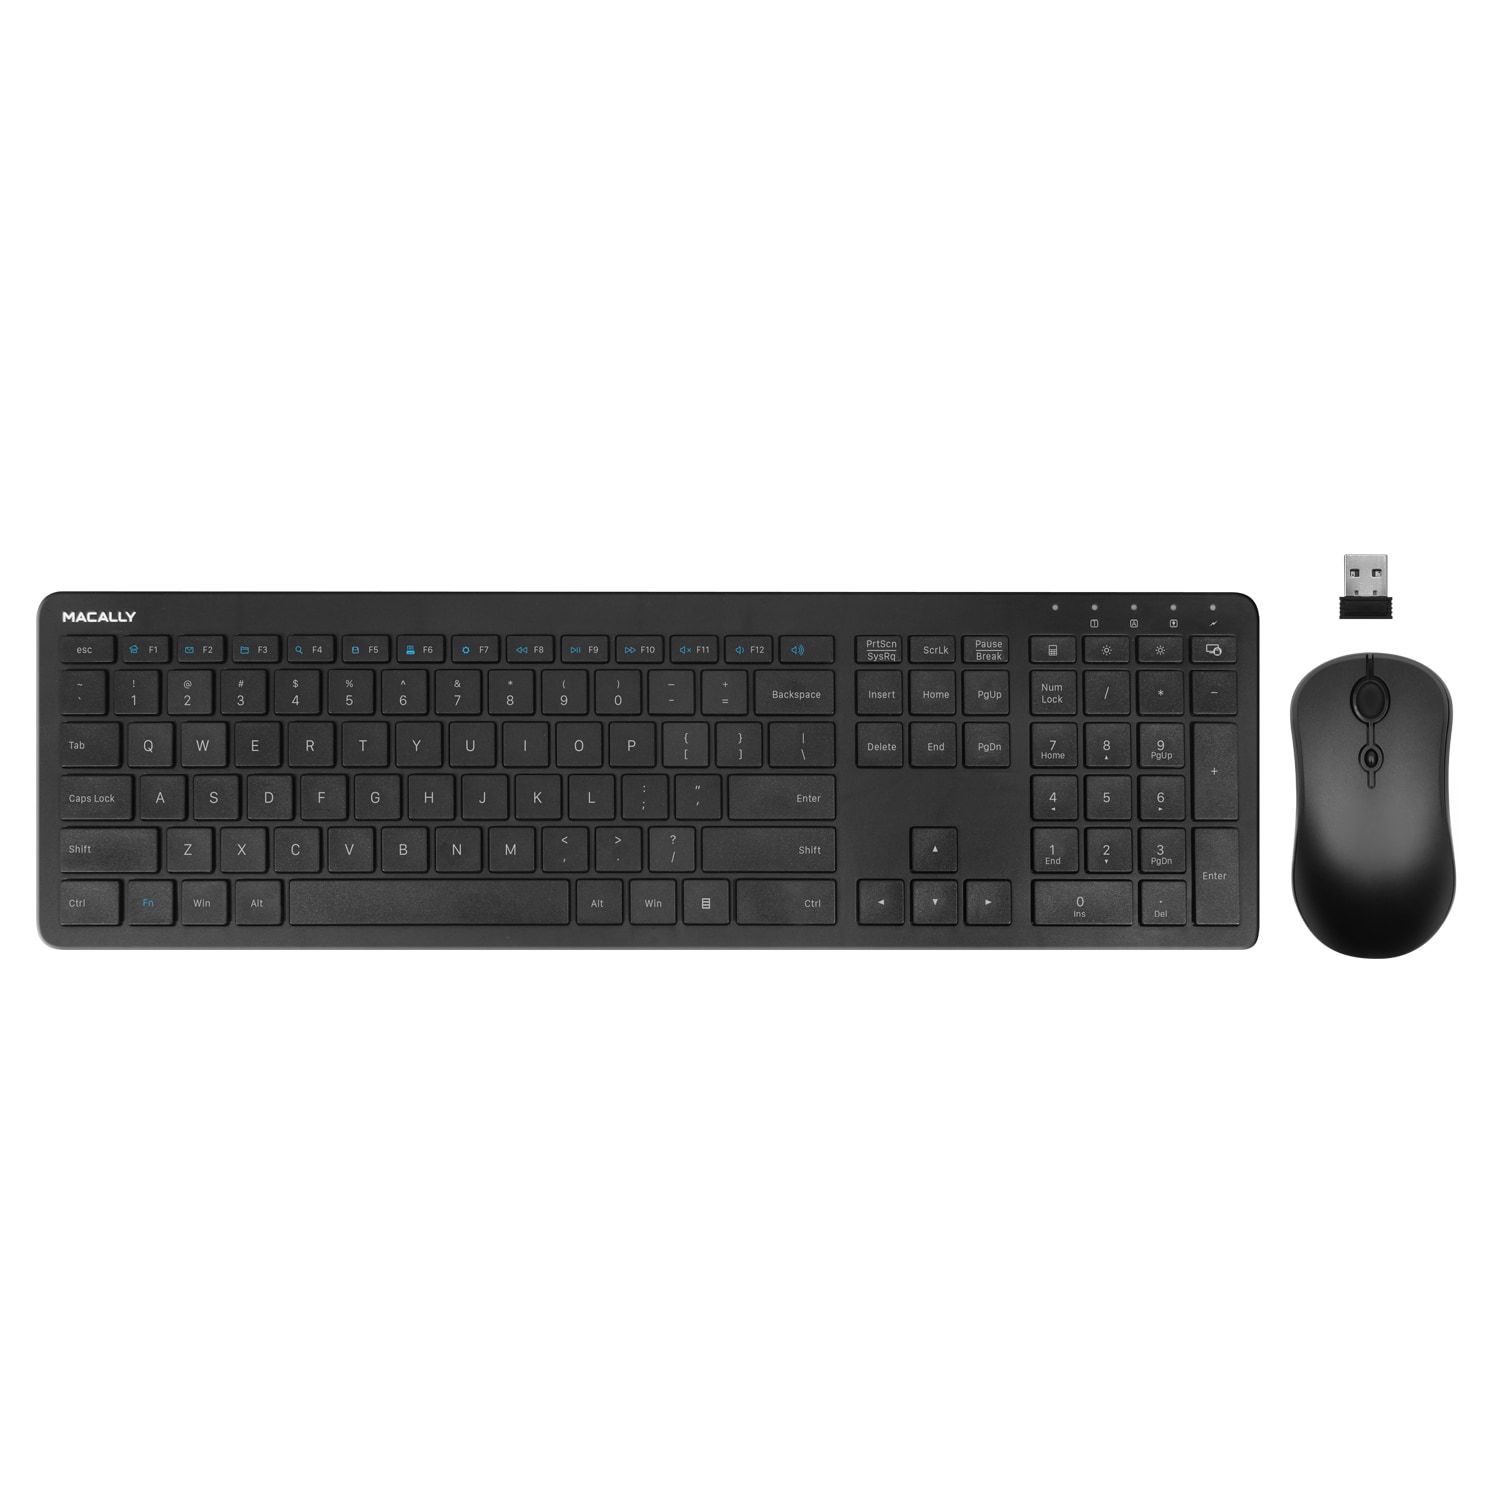 2.4G Wireless Keyboard Cordless Mouse Combo Slim Set For Computer PC Multimedia 